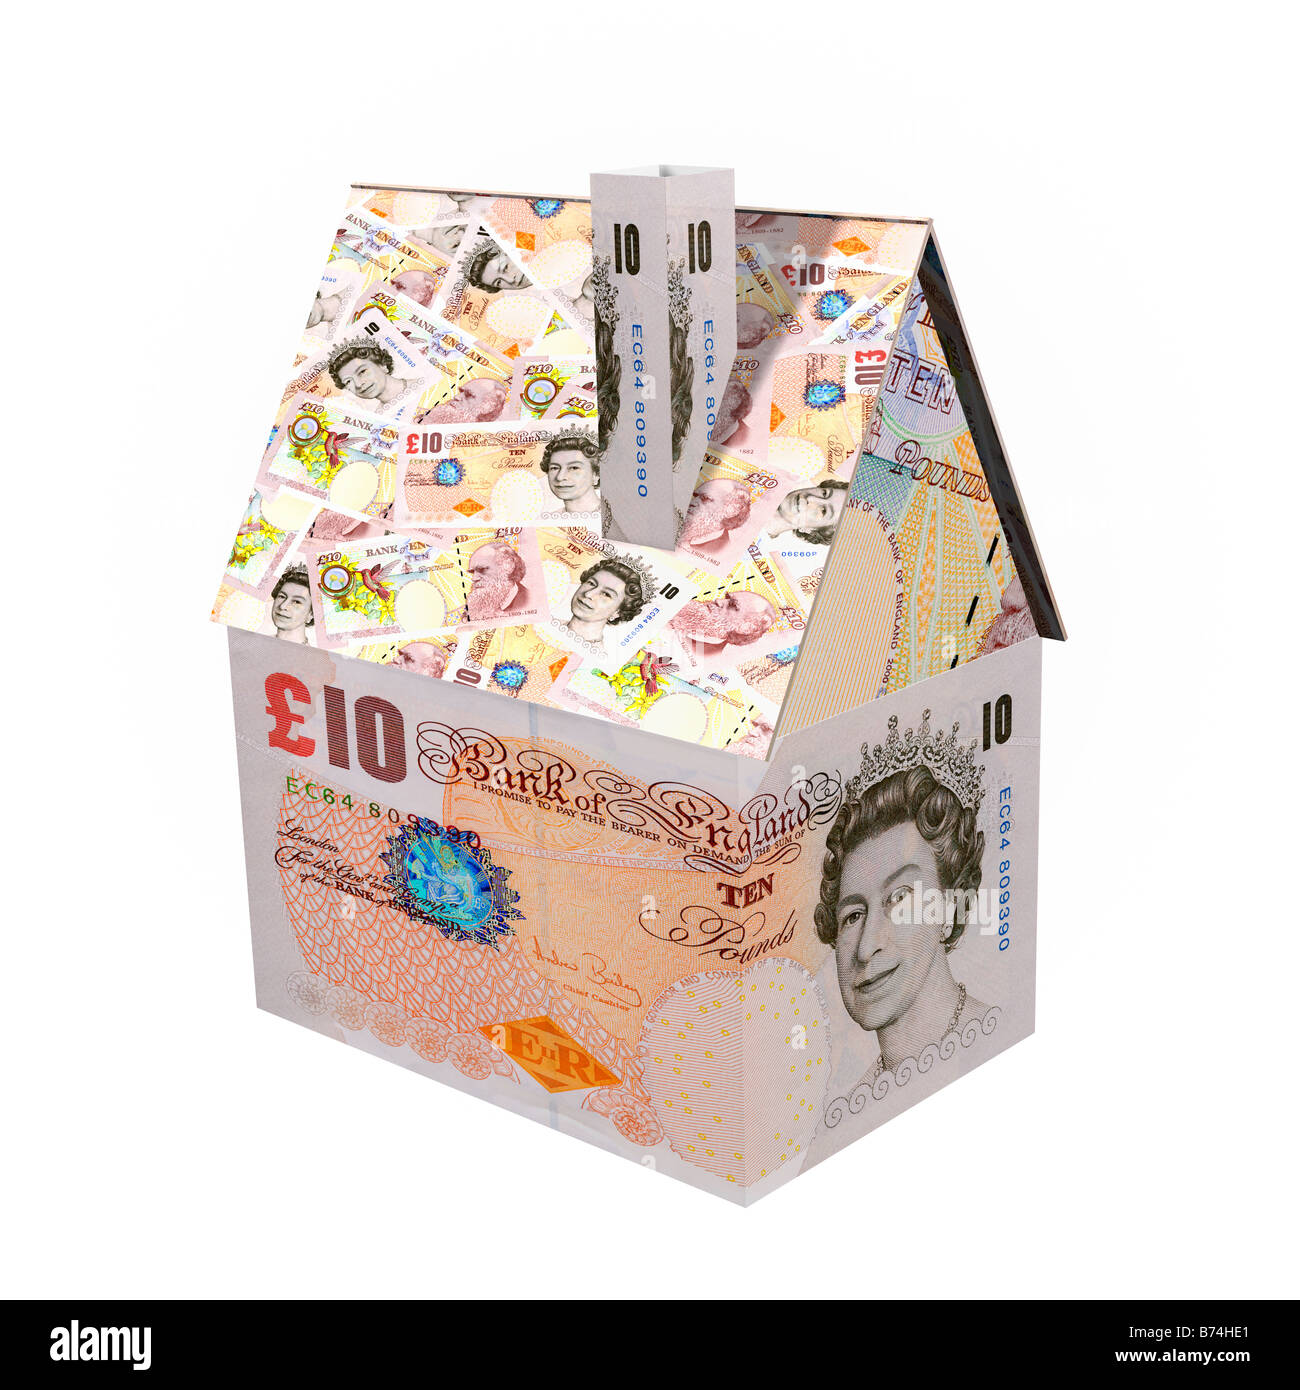 Small house made from 10 pound notes sterling - 3D CGI render financial concept Stock Photo